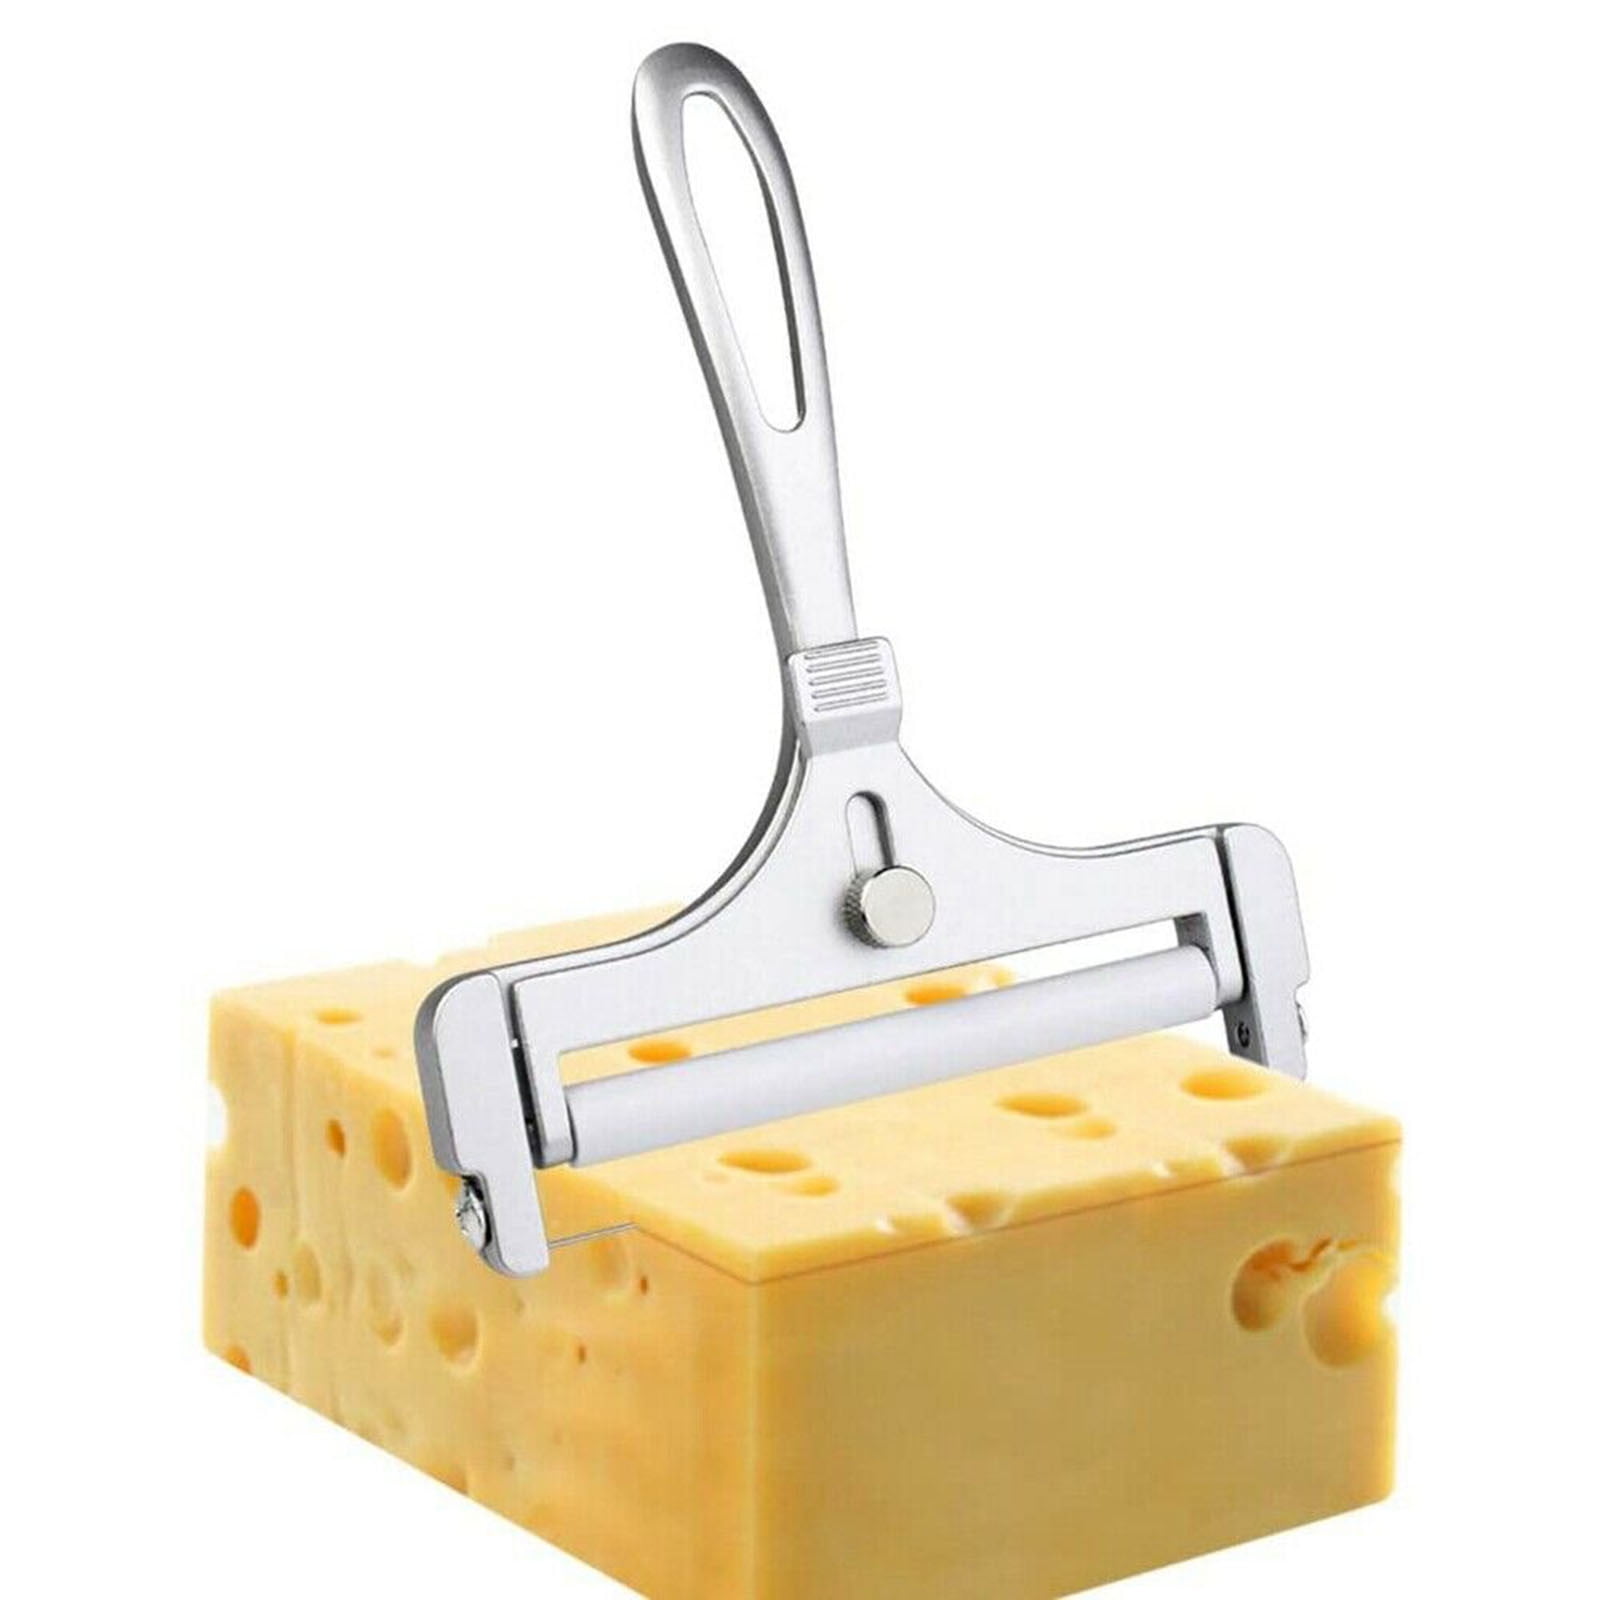 🧀🔪 Slice through block cheese like a pro with our Stainless Steel C